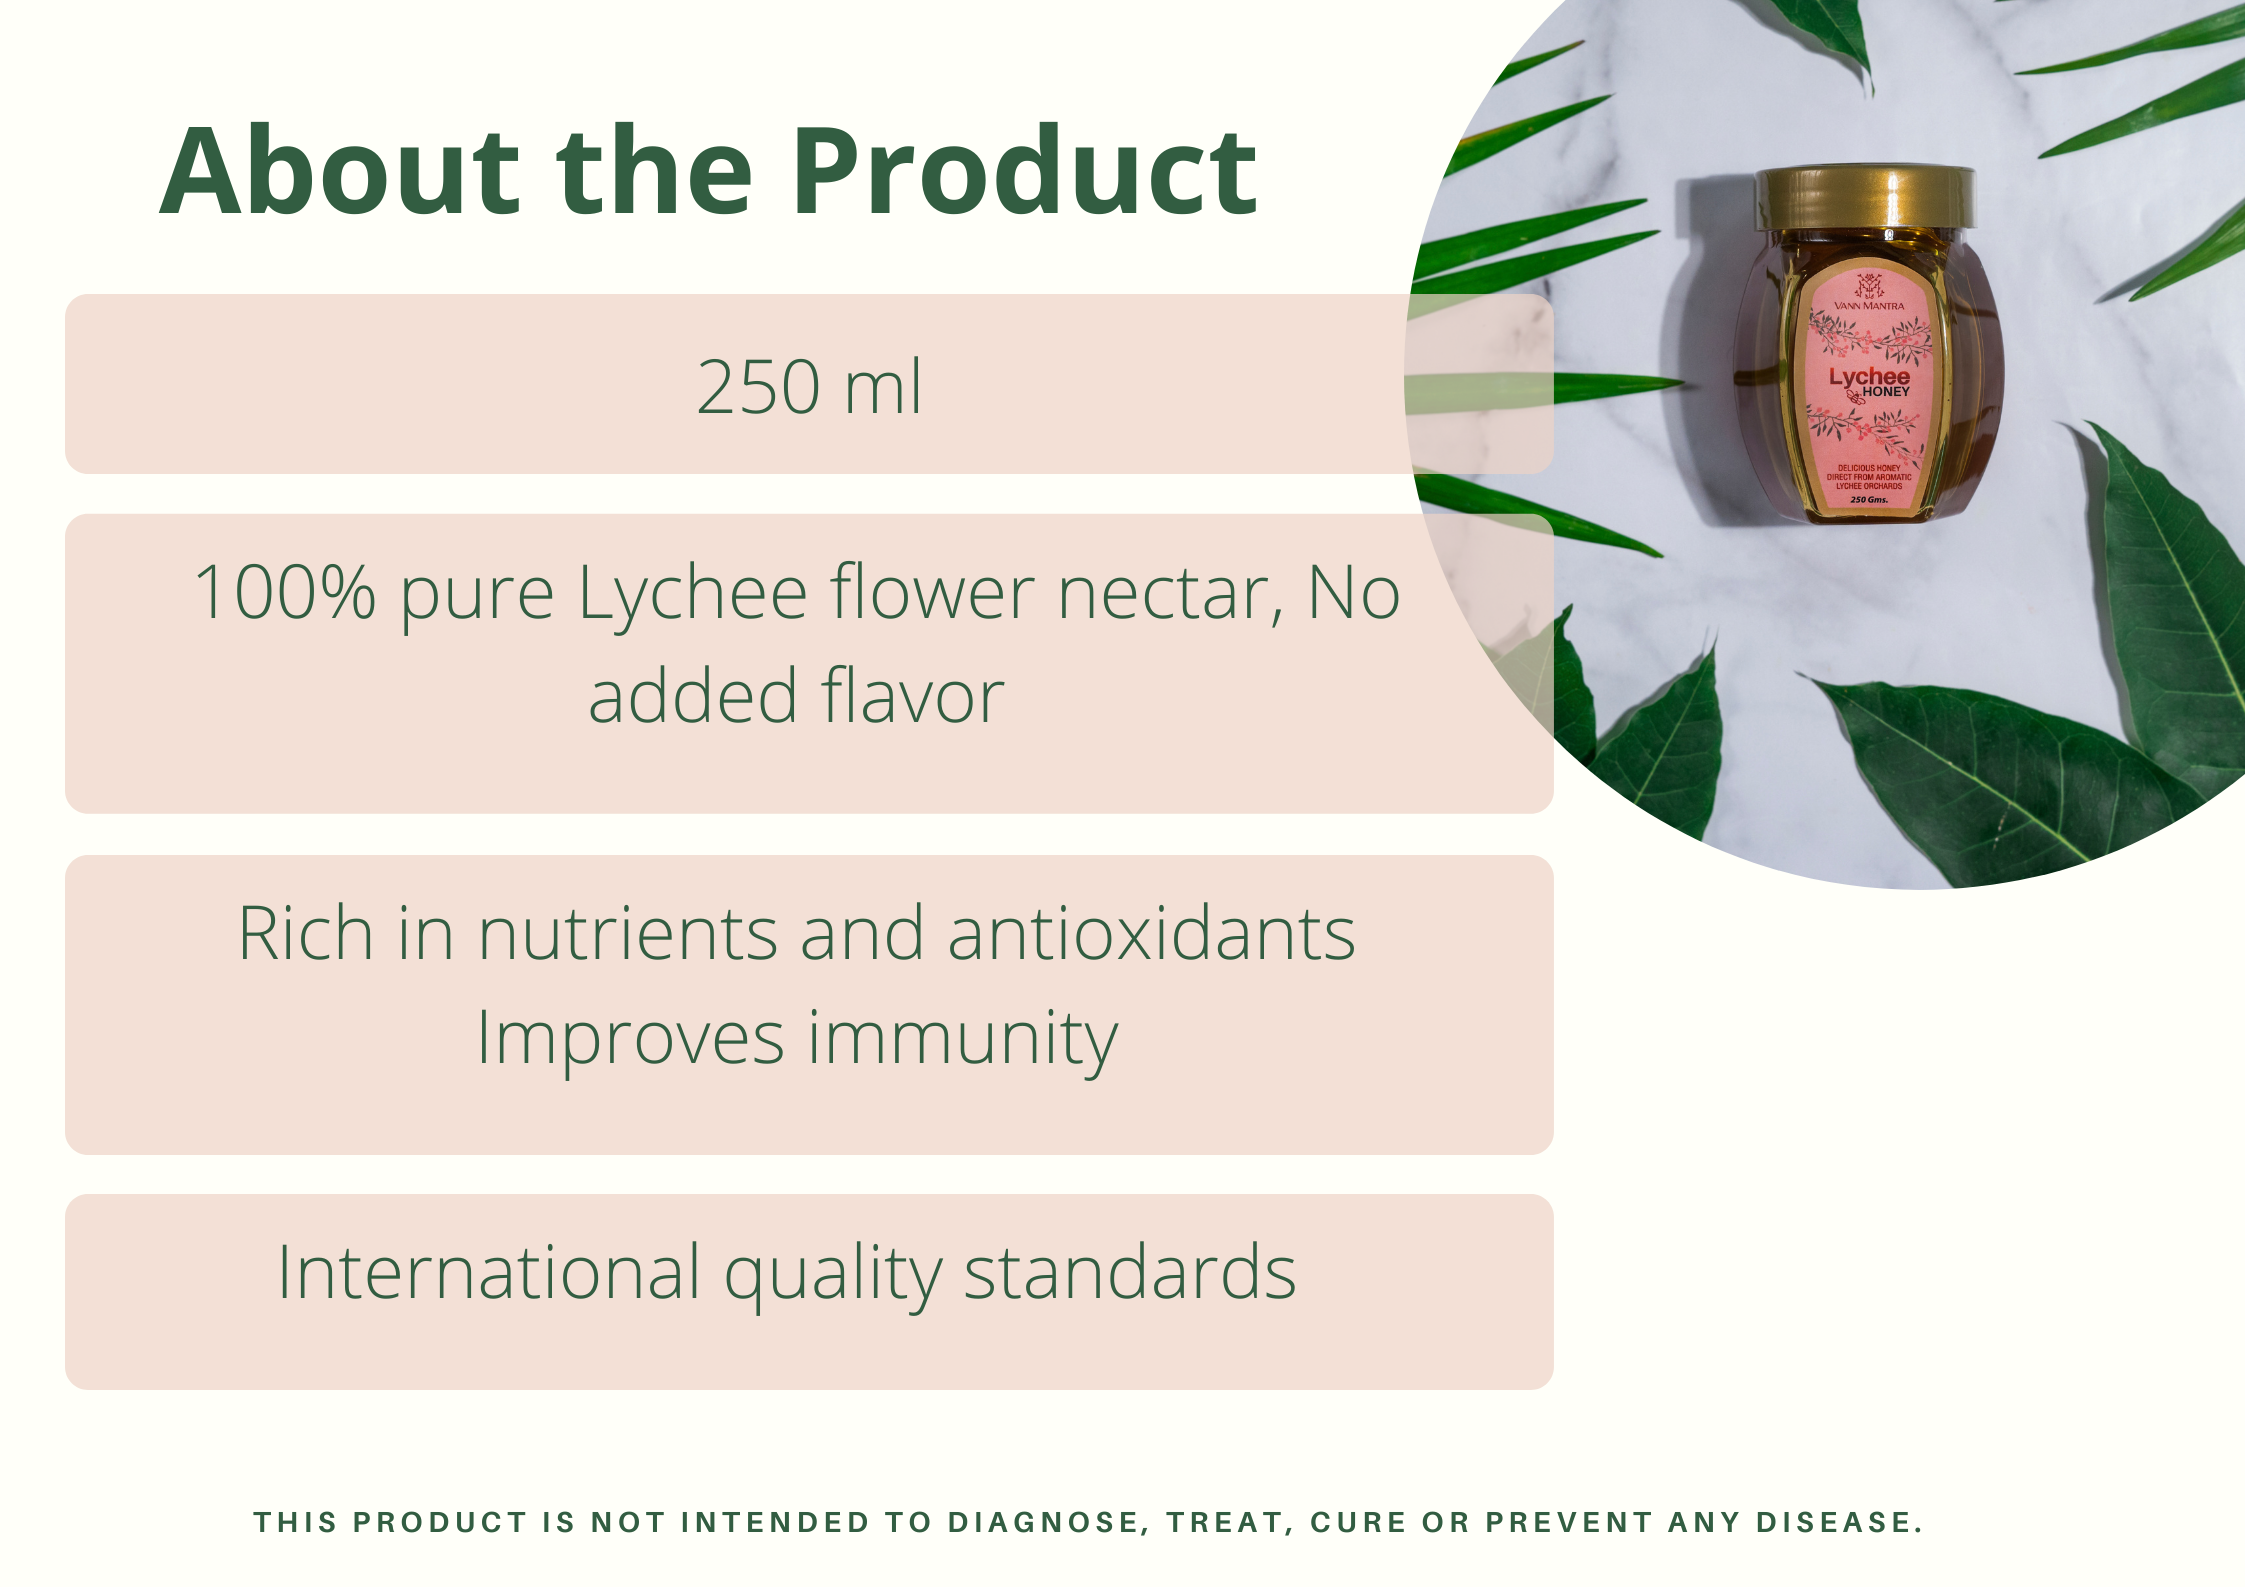 Infographic explaining the features and benefits Lychee Honey